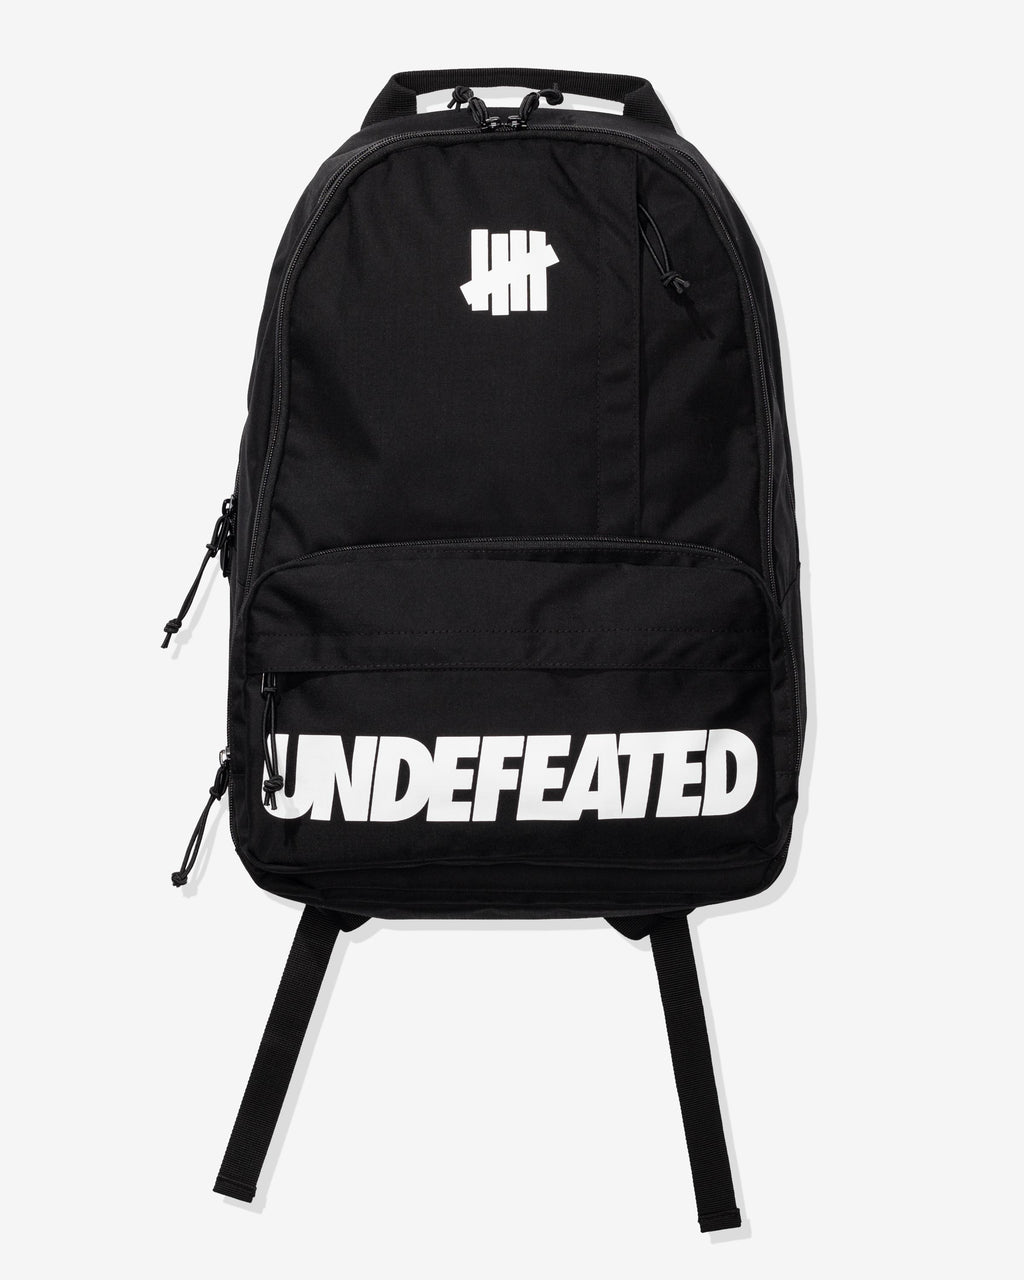 UNDEFEATED BACKPACK - BLACK